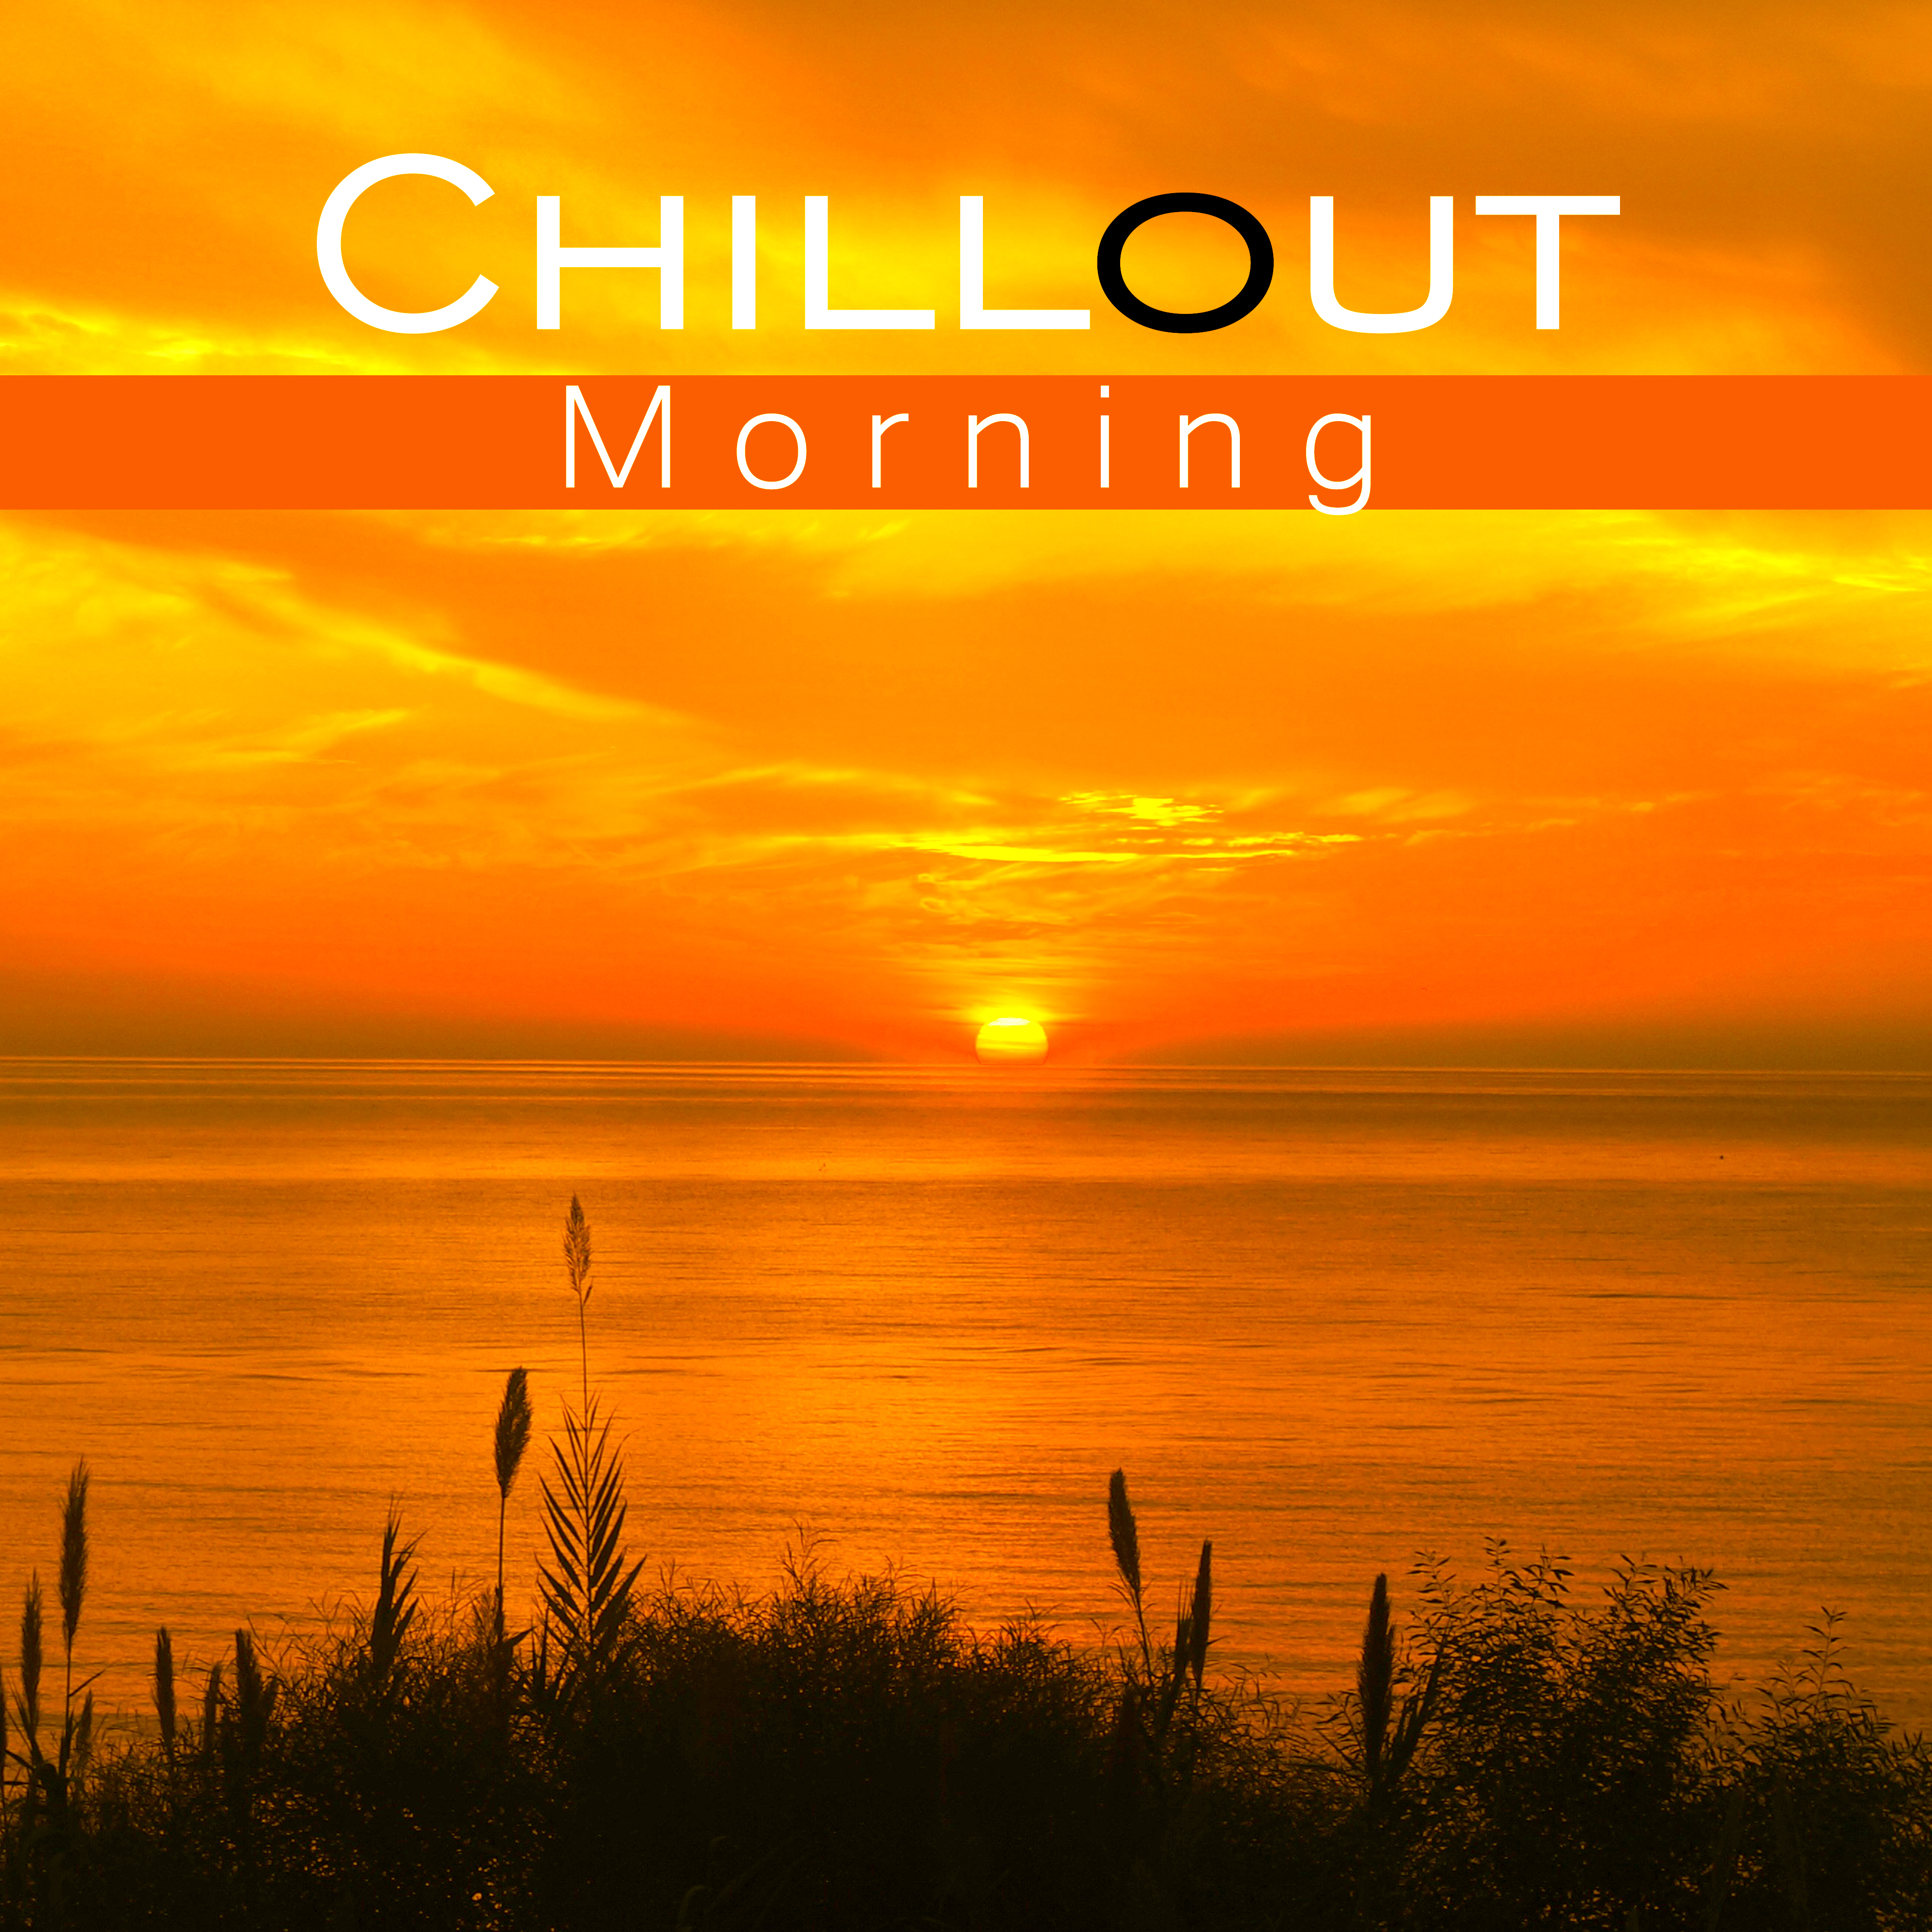 Chillout Morning – Chillout Music, Relax, Lazy Sunday, Chill Out Monday, Wake Up